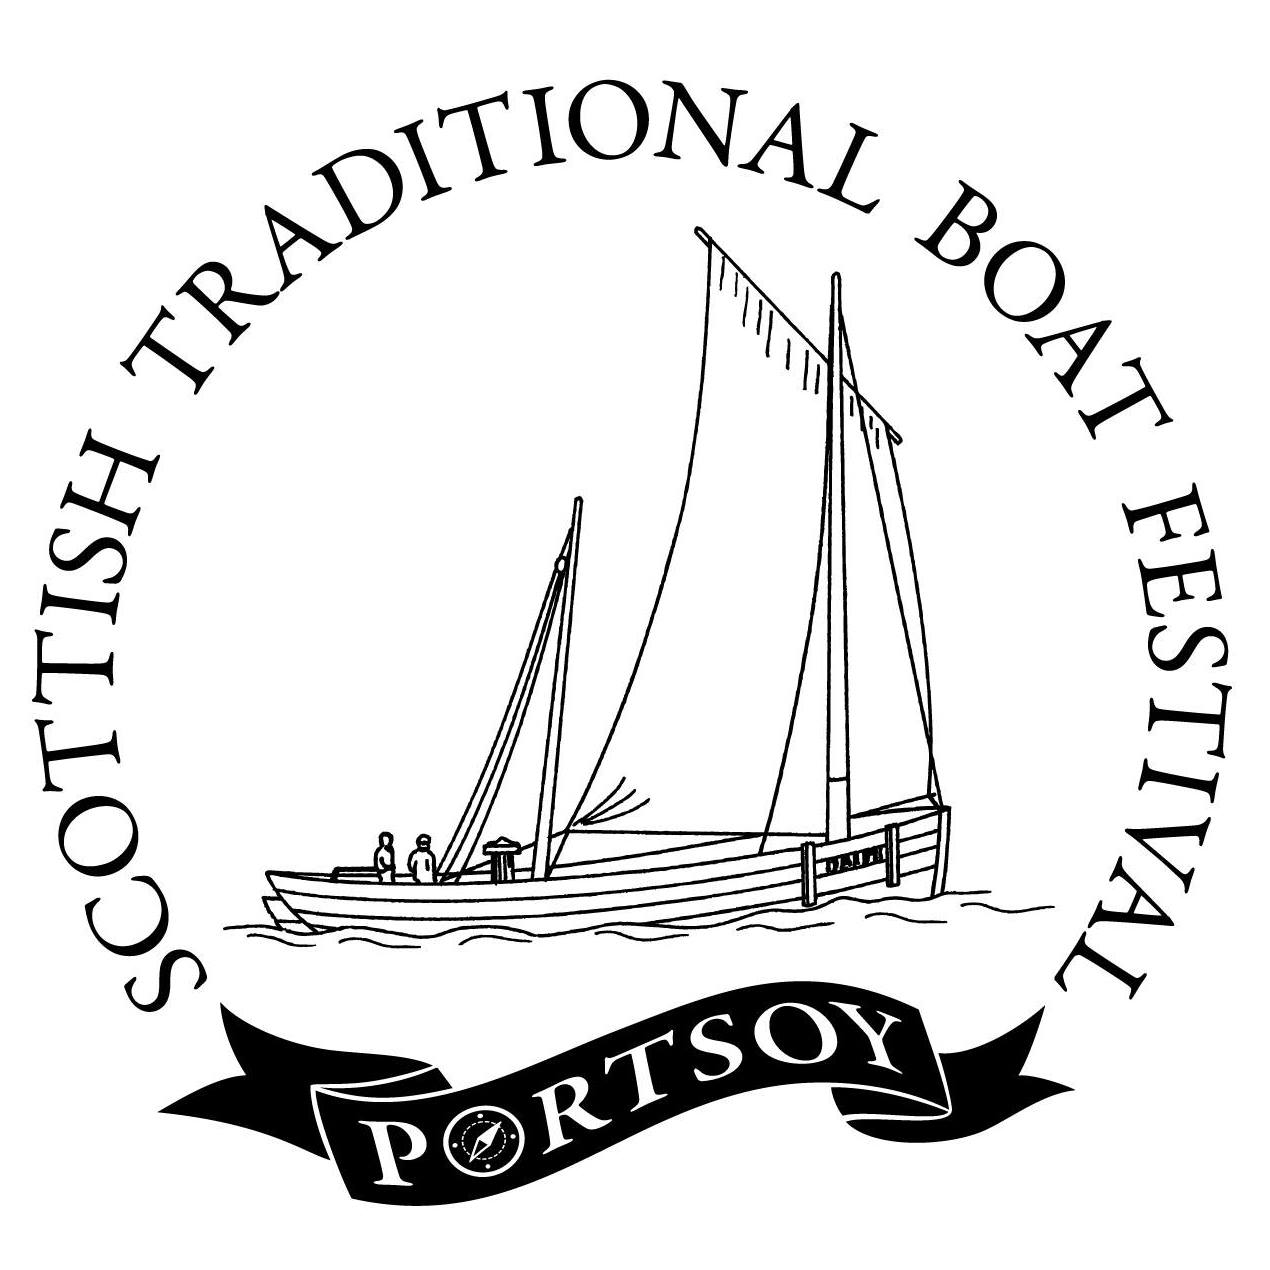 Boats Club at the Scottish Traditional Boat Festival, Portsoy